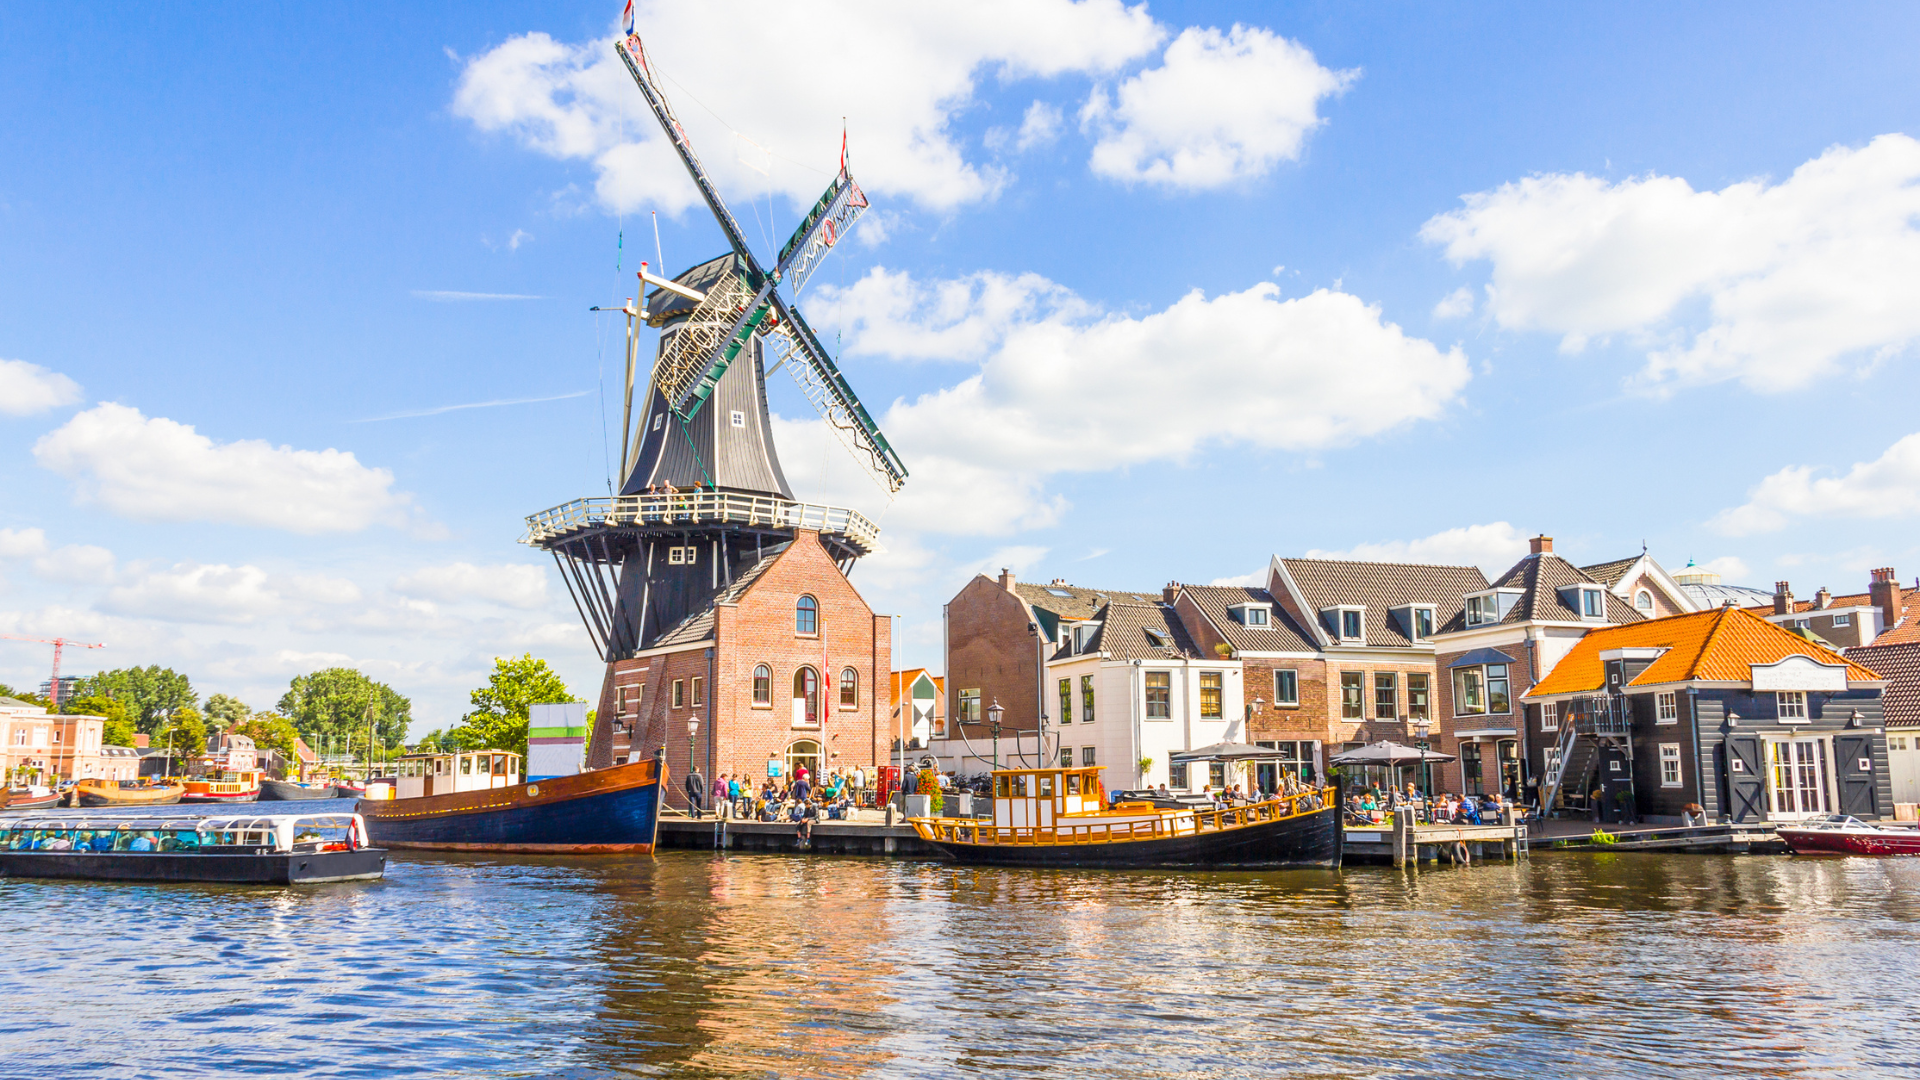 The Netherlands as an attractive destination for expats